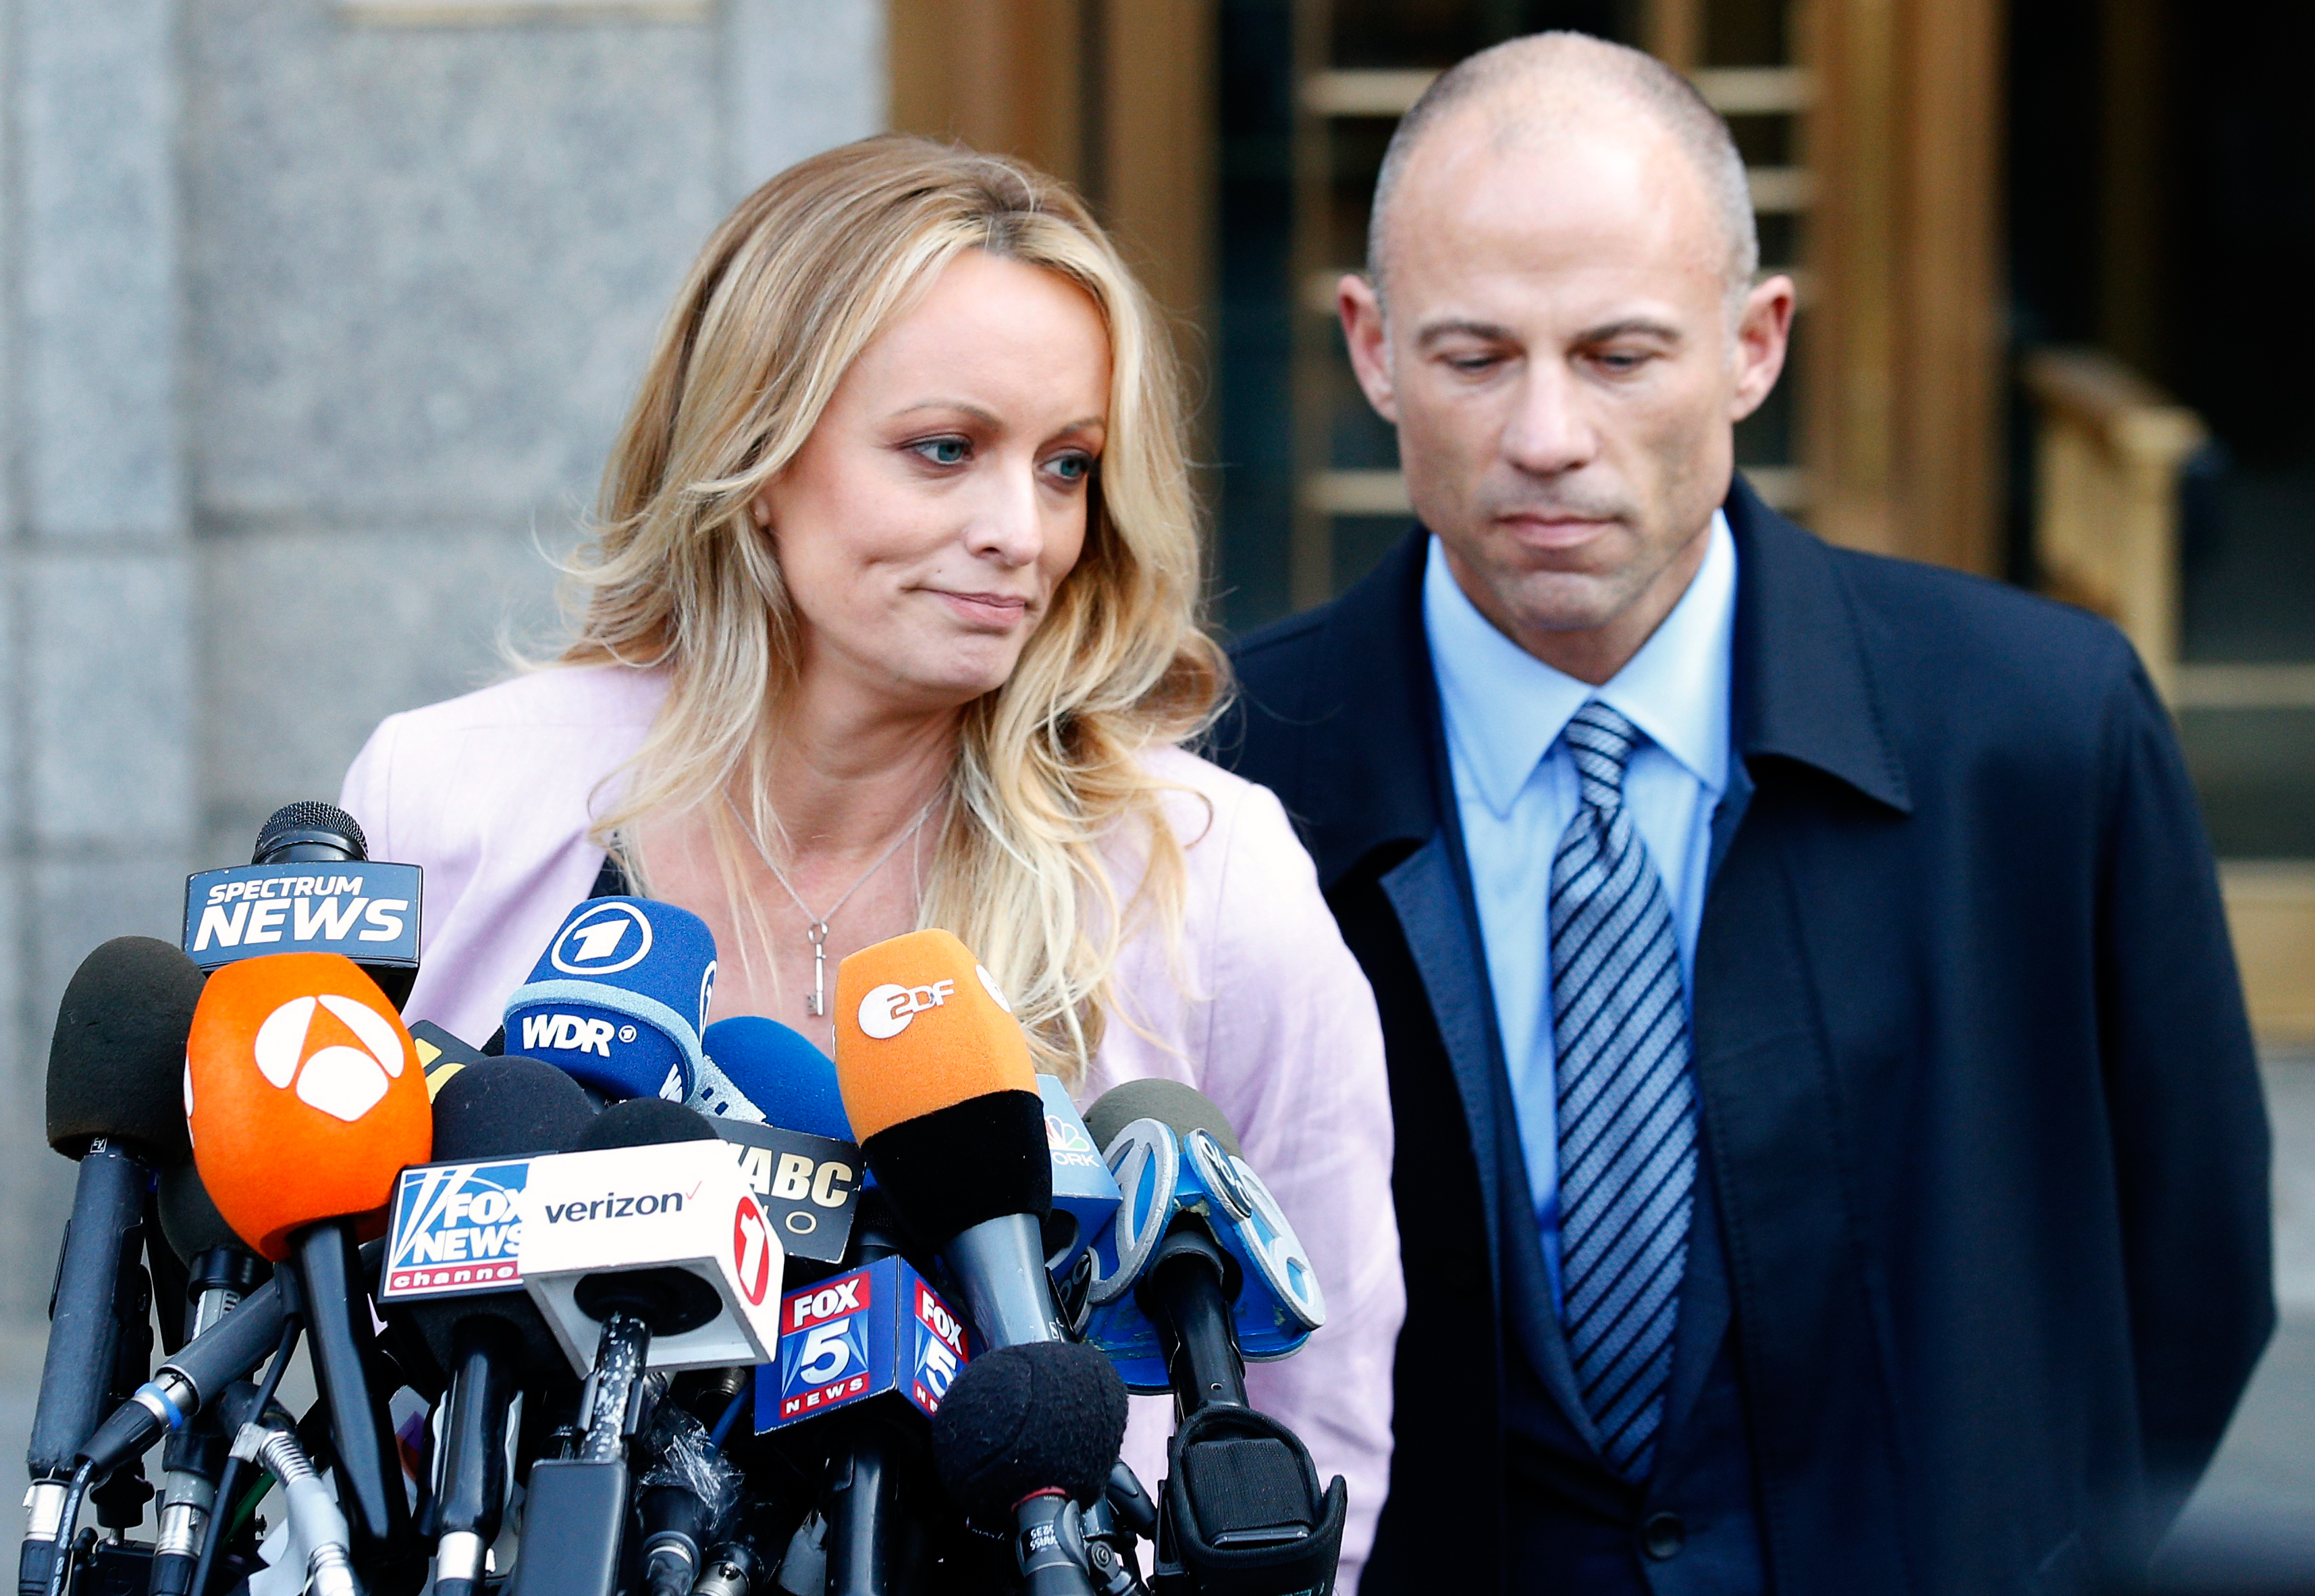 Adult film actress Stephanie Clifford, also known as Stormy Daniels, speaks to media along with lawyer Michael Avenatti  outside federal court in Manhattan